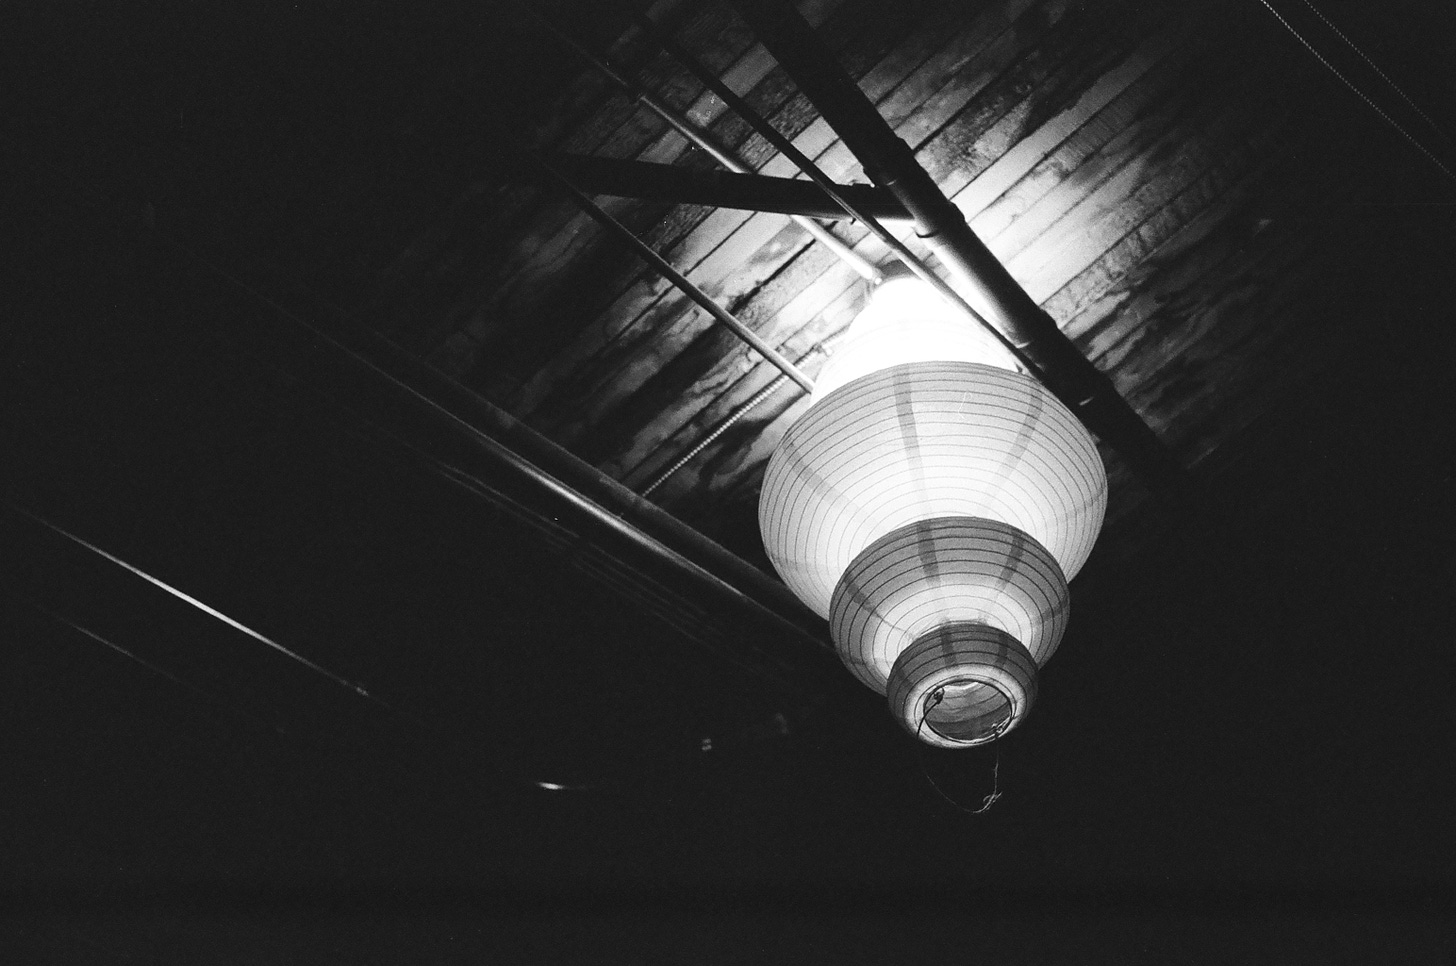 A black and white photo of an Asian lamp